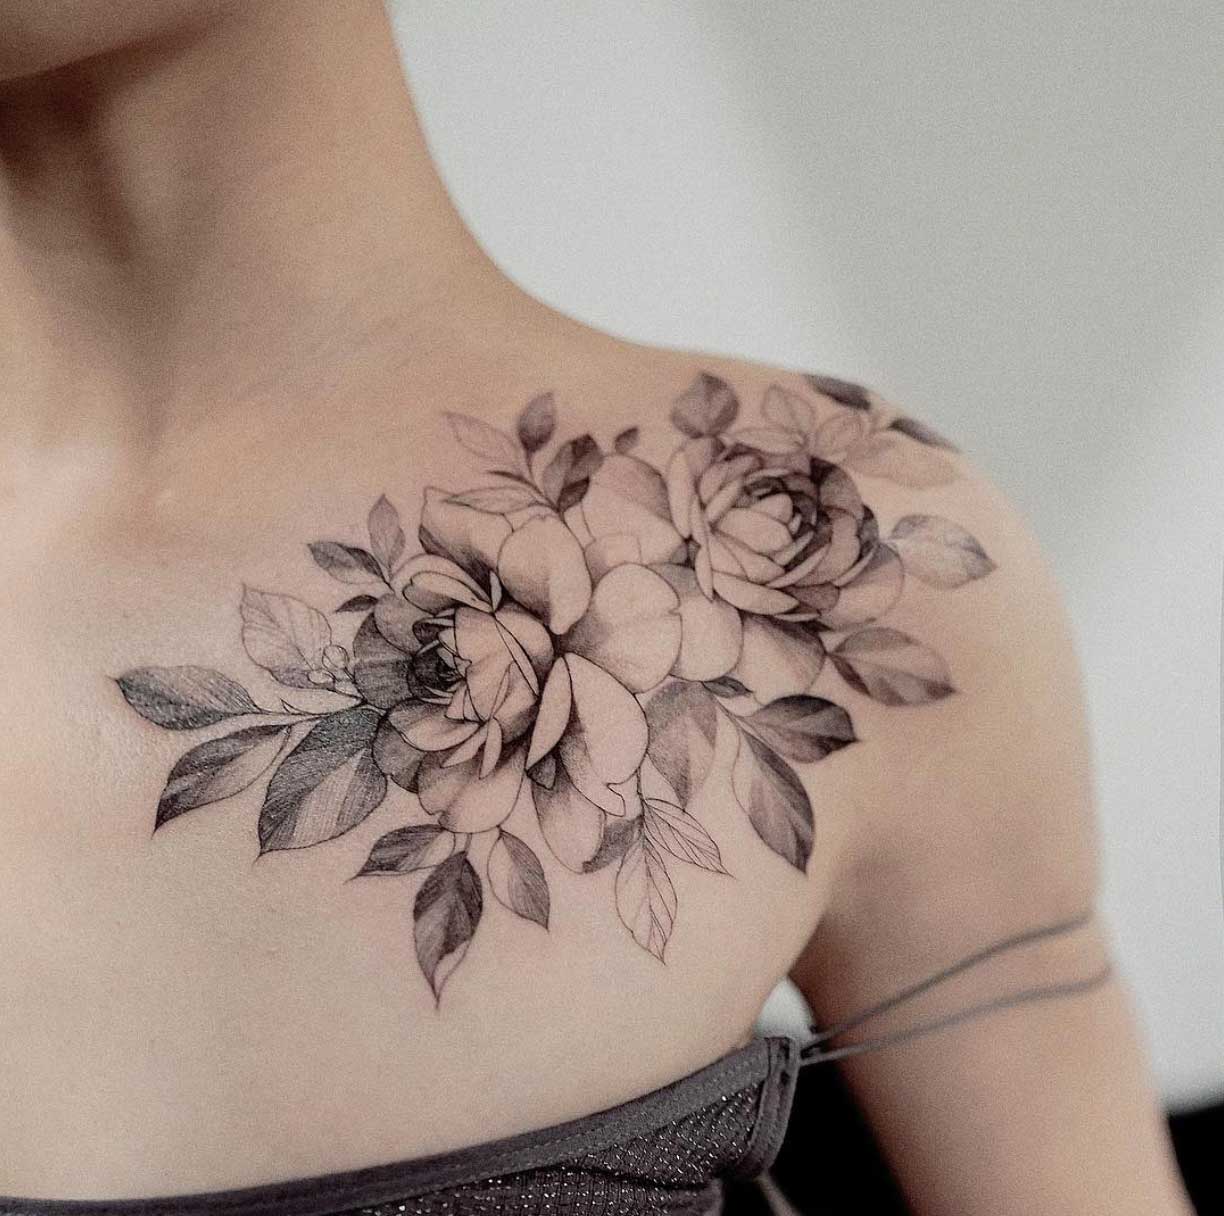 A floral shoulder piece by Zihwa